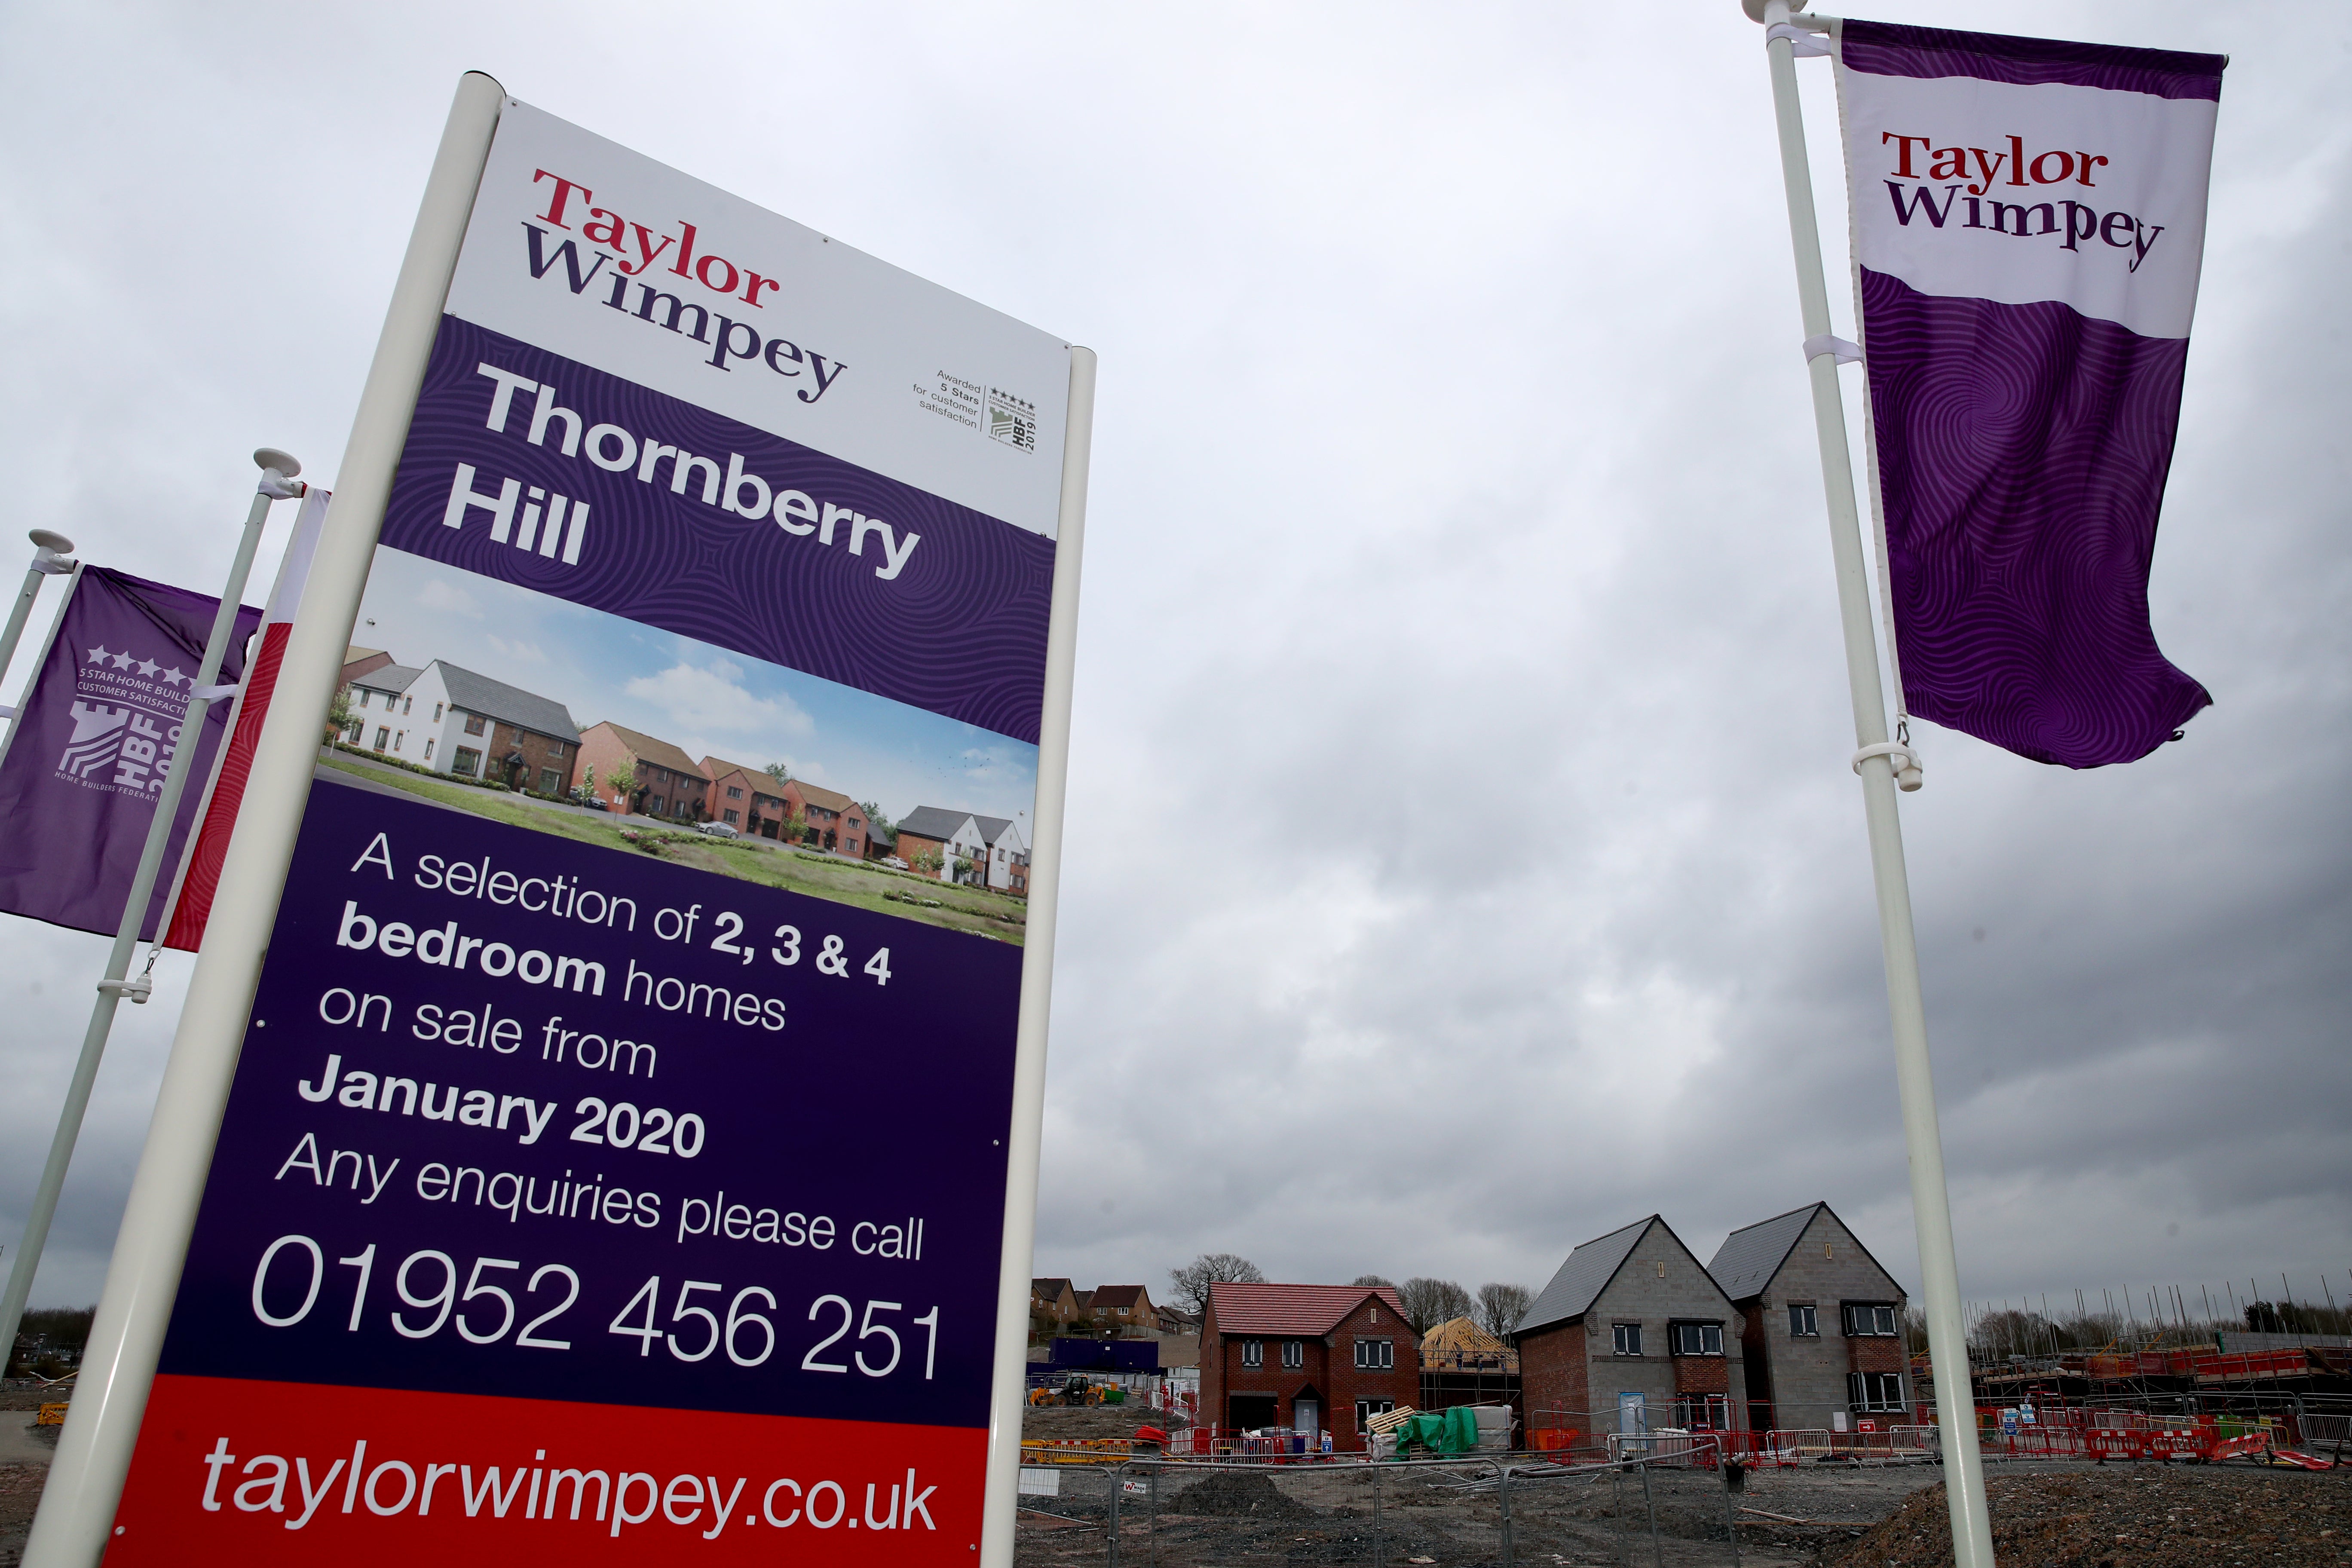 Housebuilder Taylor Wimpey said it will buy back £150m of shares from investors this year after revealing that profits more than doubled in 2021 (Nick Potts/PA)